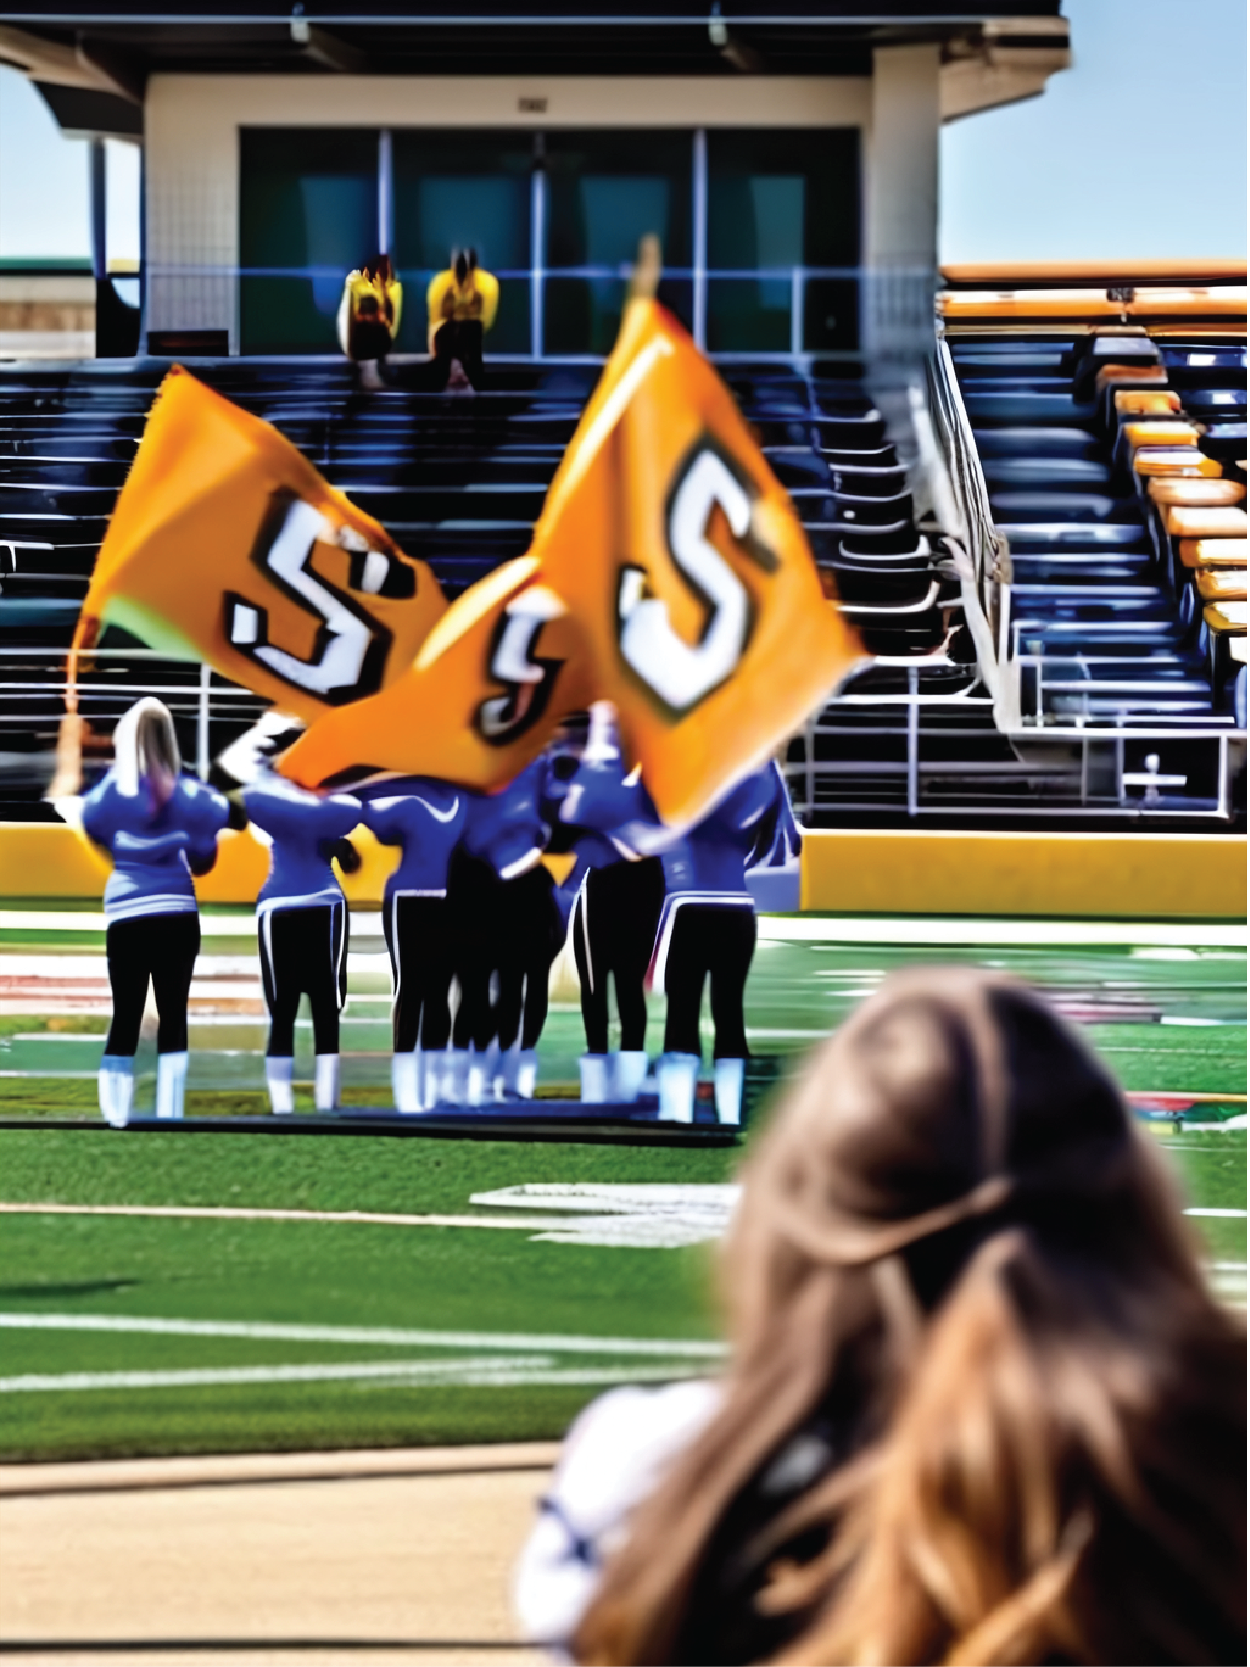 Customizable Spirit flags for pep rallies, football games, cheerleading and more for high schools and colleges 